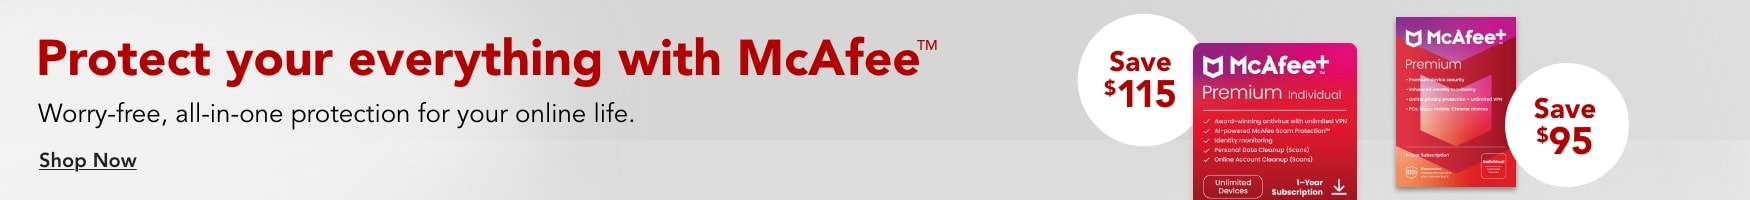 Protect your everything with McAfee